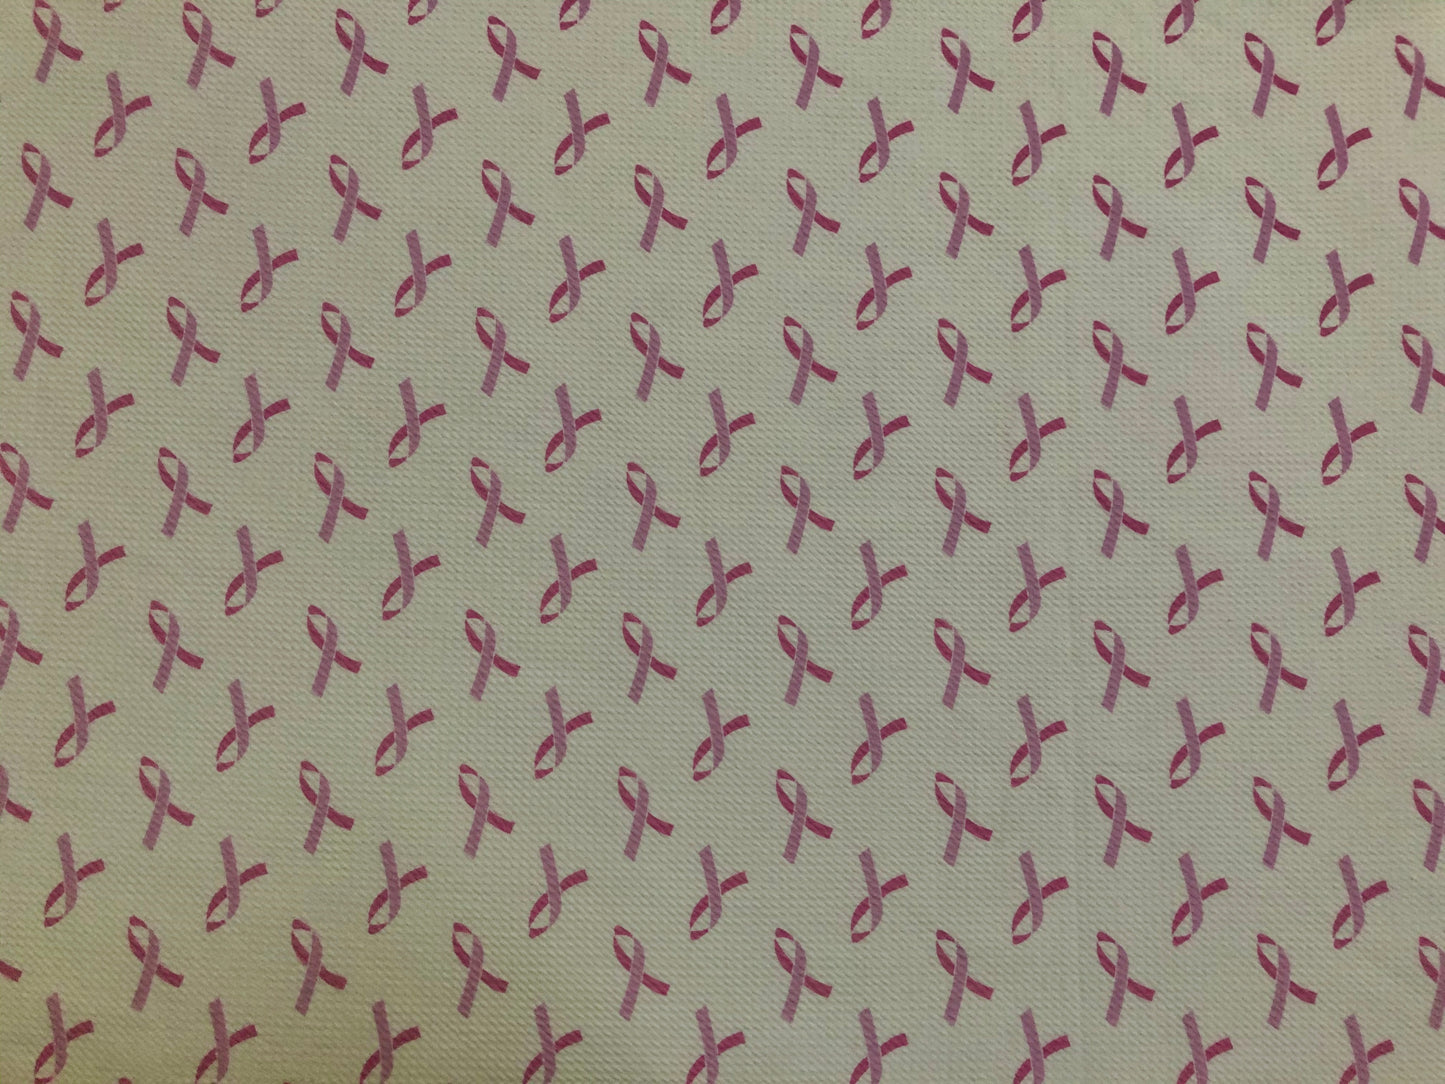 Bullet Knit Printed Fabric-Ivory Mauve Lavender Ribbons-BPR145-Sold by the Yard